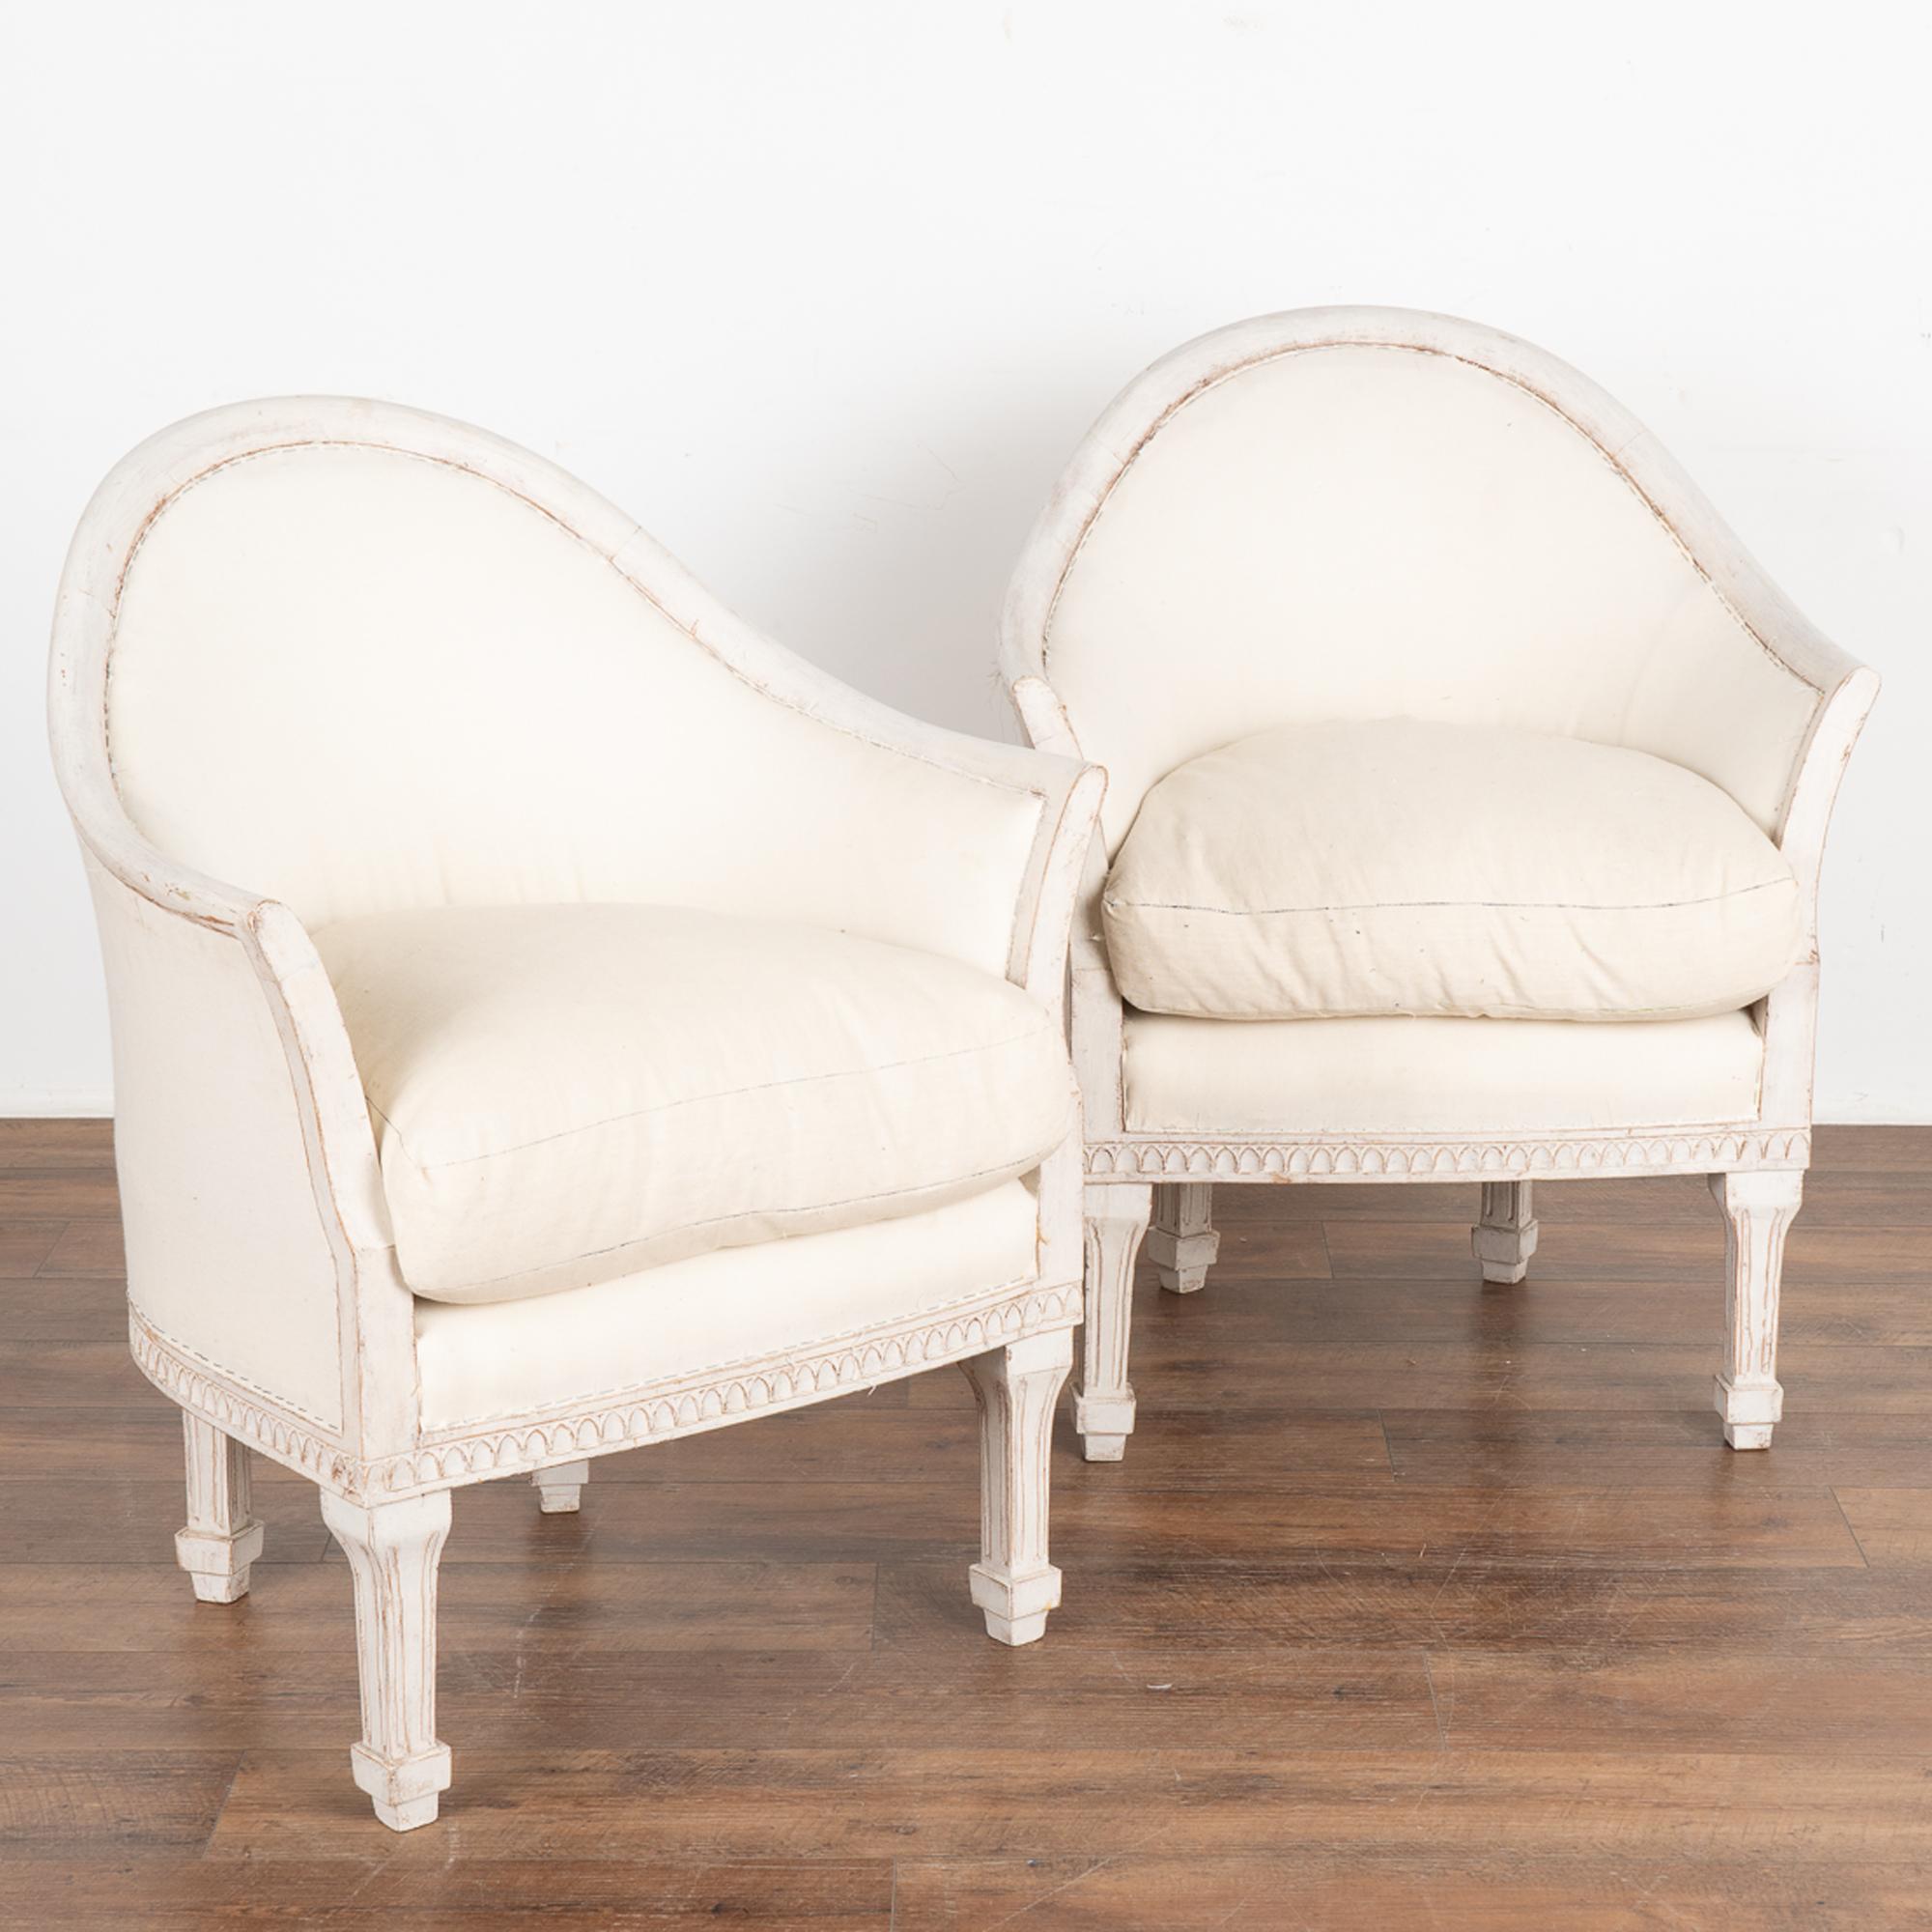 This pair of Swedish arm chairs have a gently curved barrel back and slightly turned out arms, adding to the graceful appeal of each.
Fluted legs and decorative carving embellish the skirt. 
The newer professionally applied white layered painted